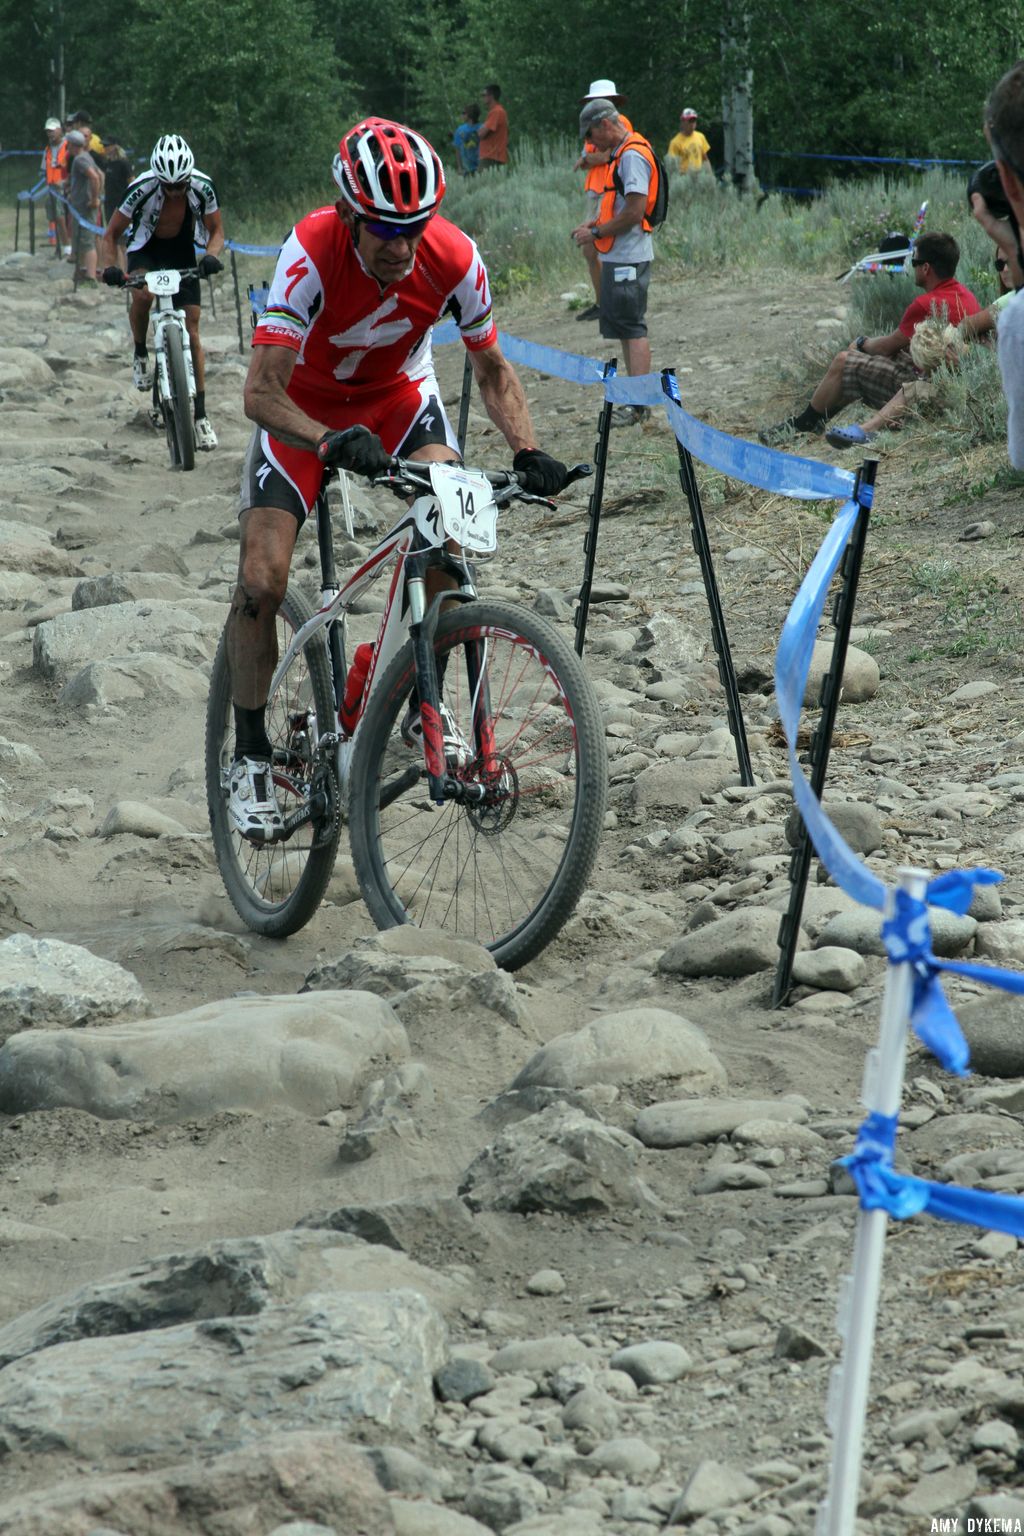 Ned Overend uses his top-notch handling skills to fly through the rock garden. ©Amy Dykema